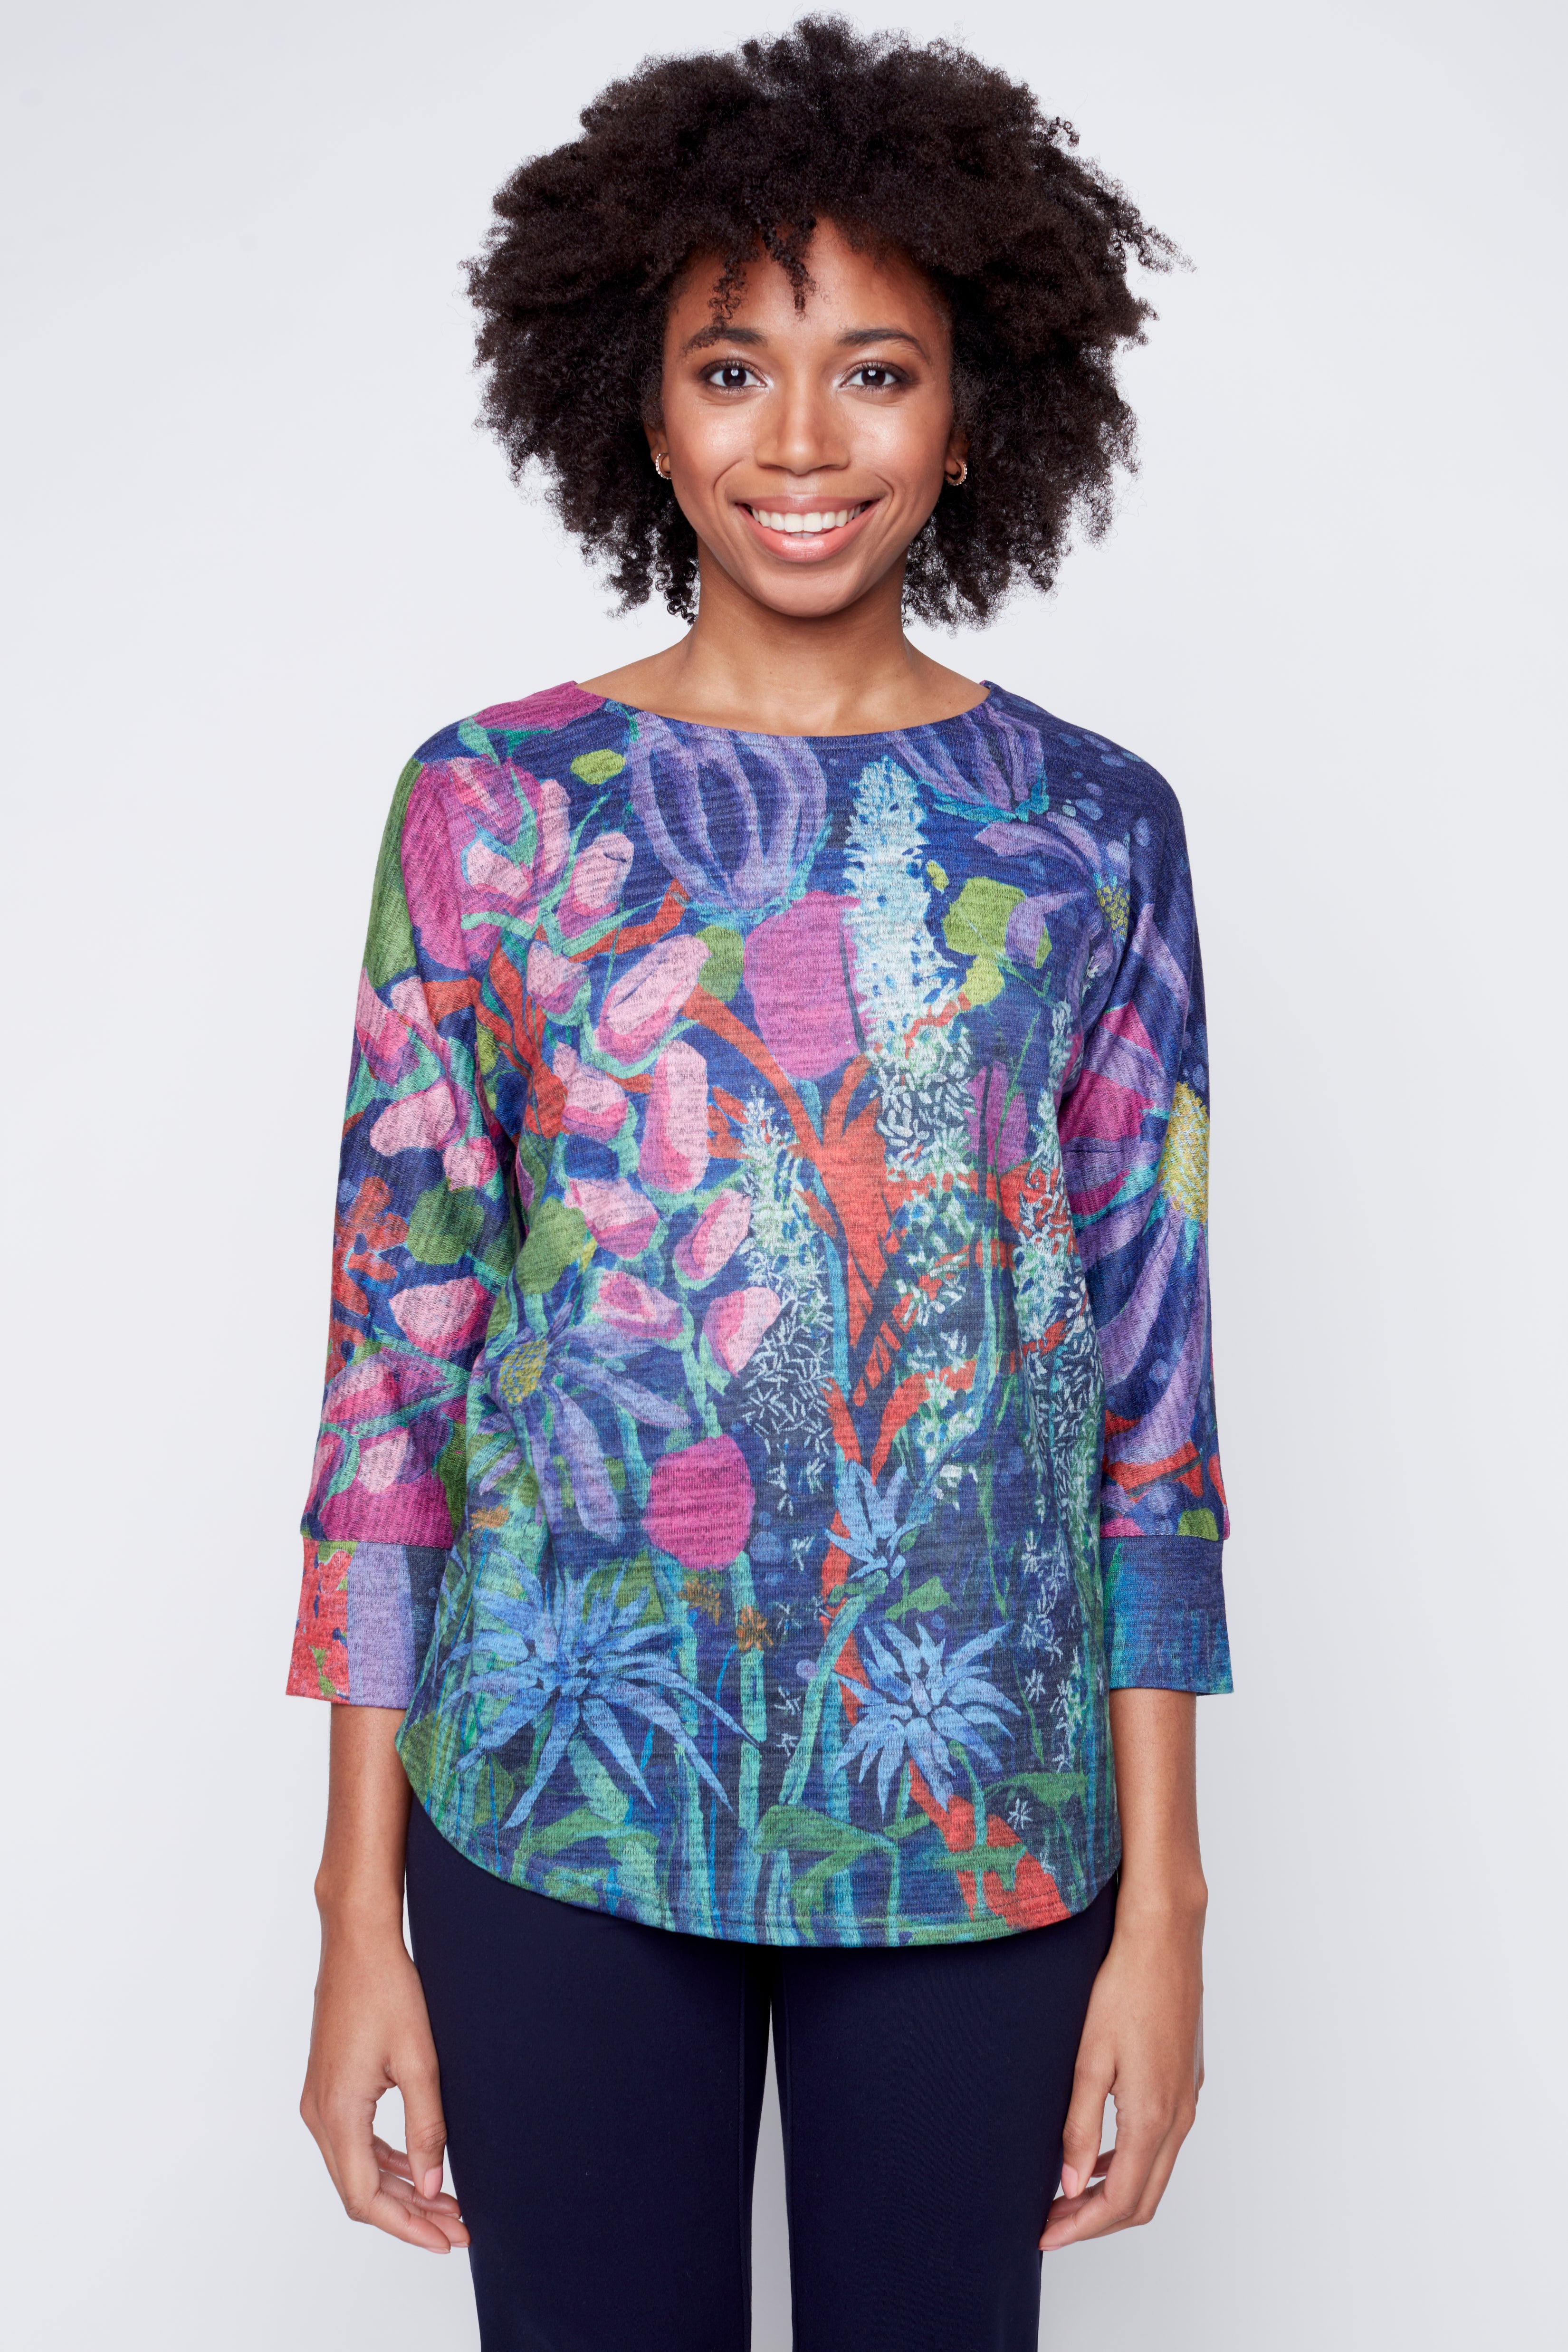 Of Fragrance & Flowers 3/4-length sleeve knit top – The Wearable Art Store